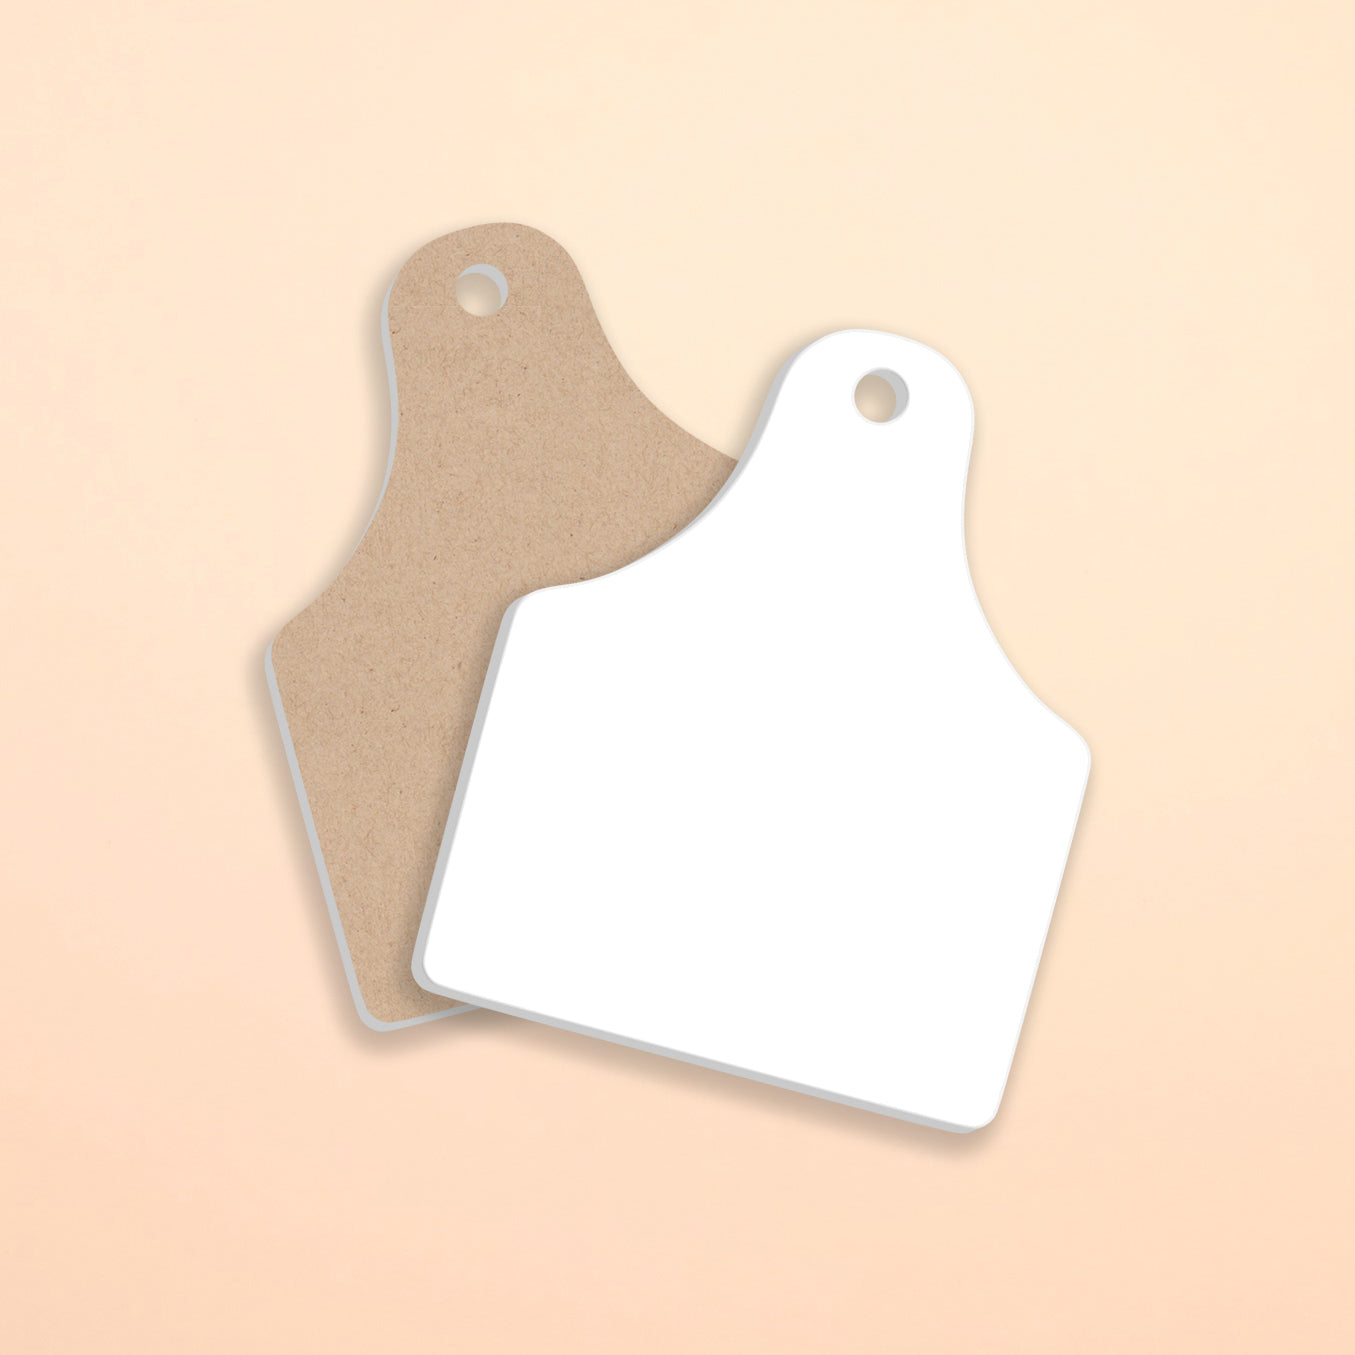 Gems & Timber White Acrylic Double Sided Sublimation Blanks for Keychains in Cow Tag Shape